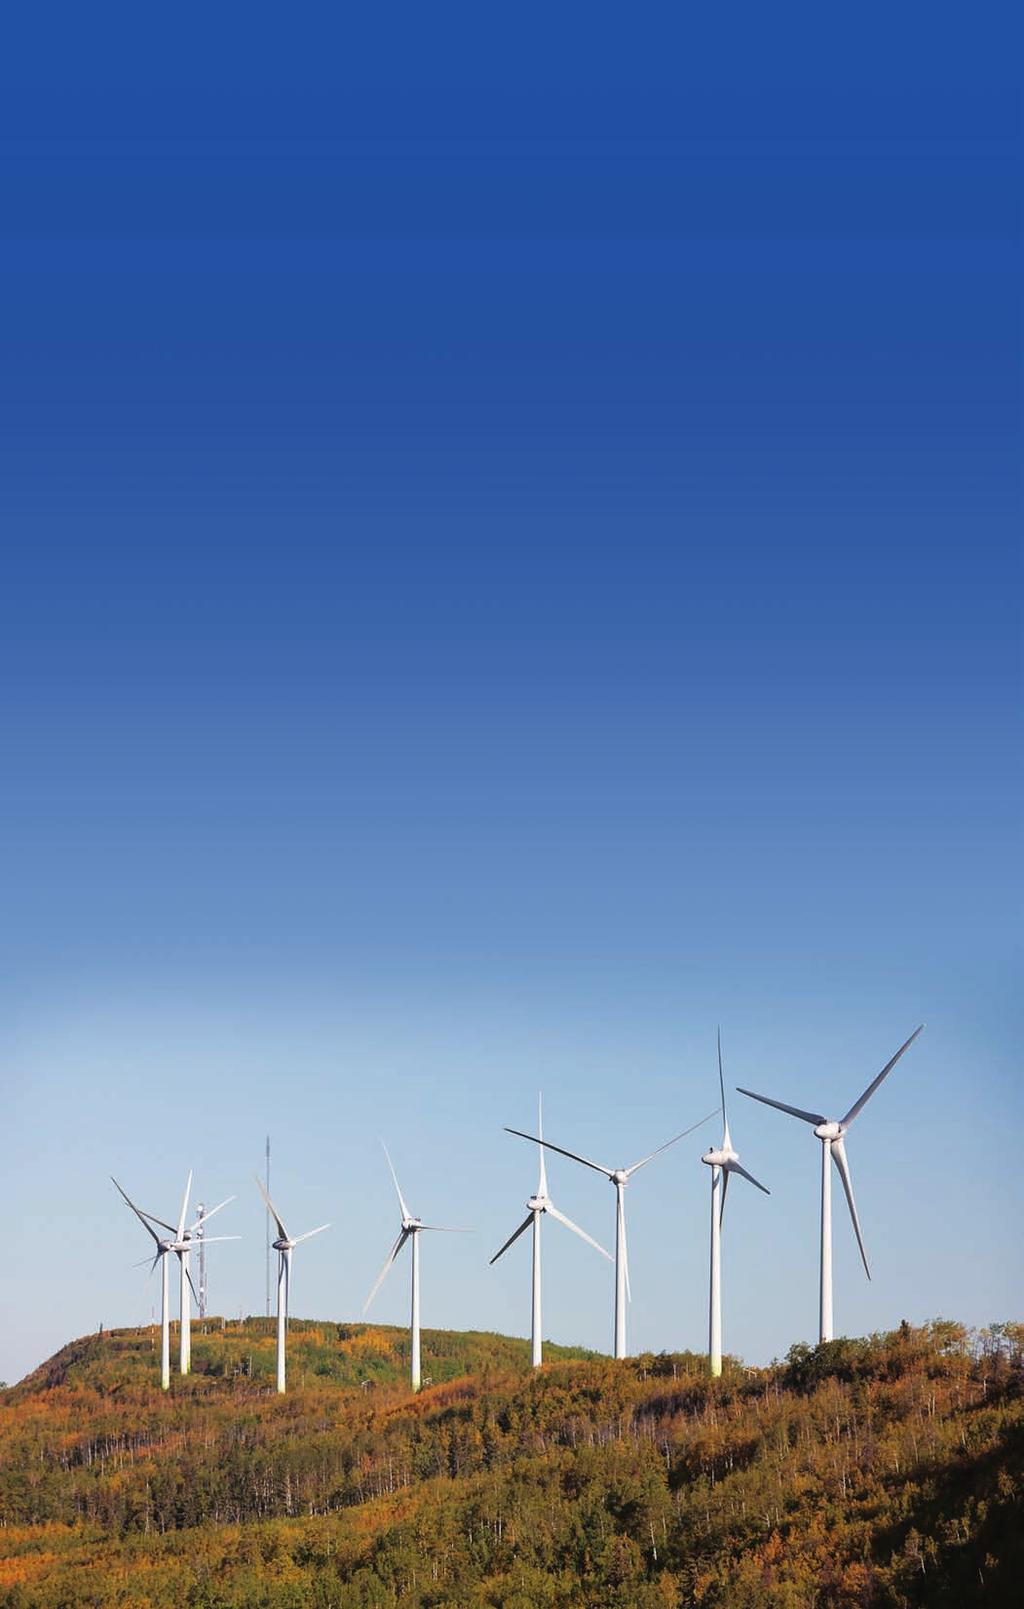 Like elsewhere in Canada and in over 80 countries around the world, wind energy is an abundant and affordable source of clean electricity that is becoming an increasingly important part of